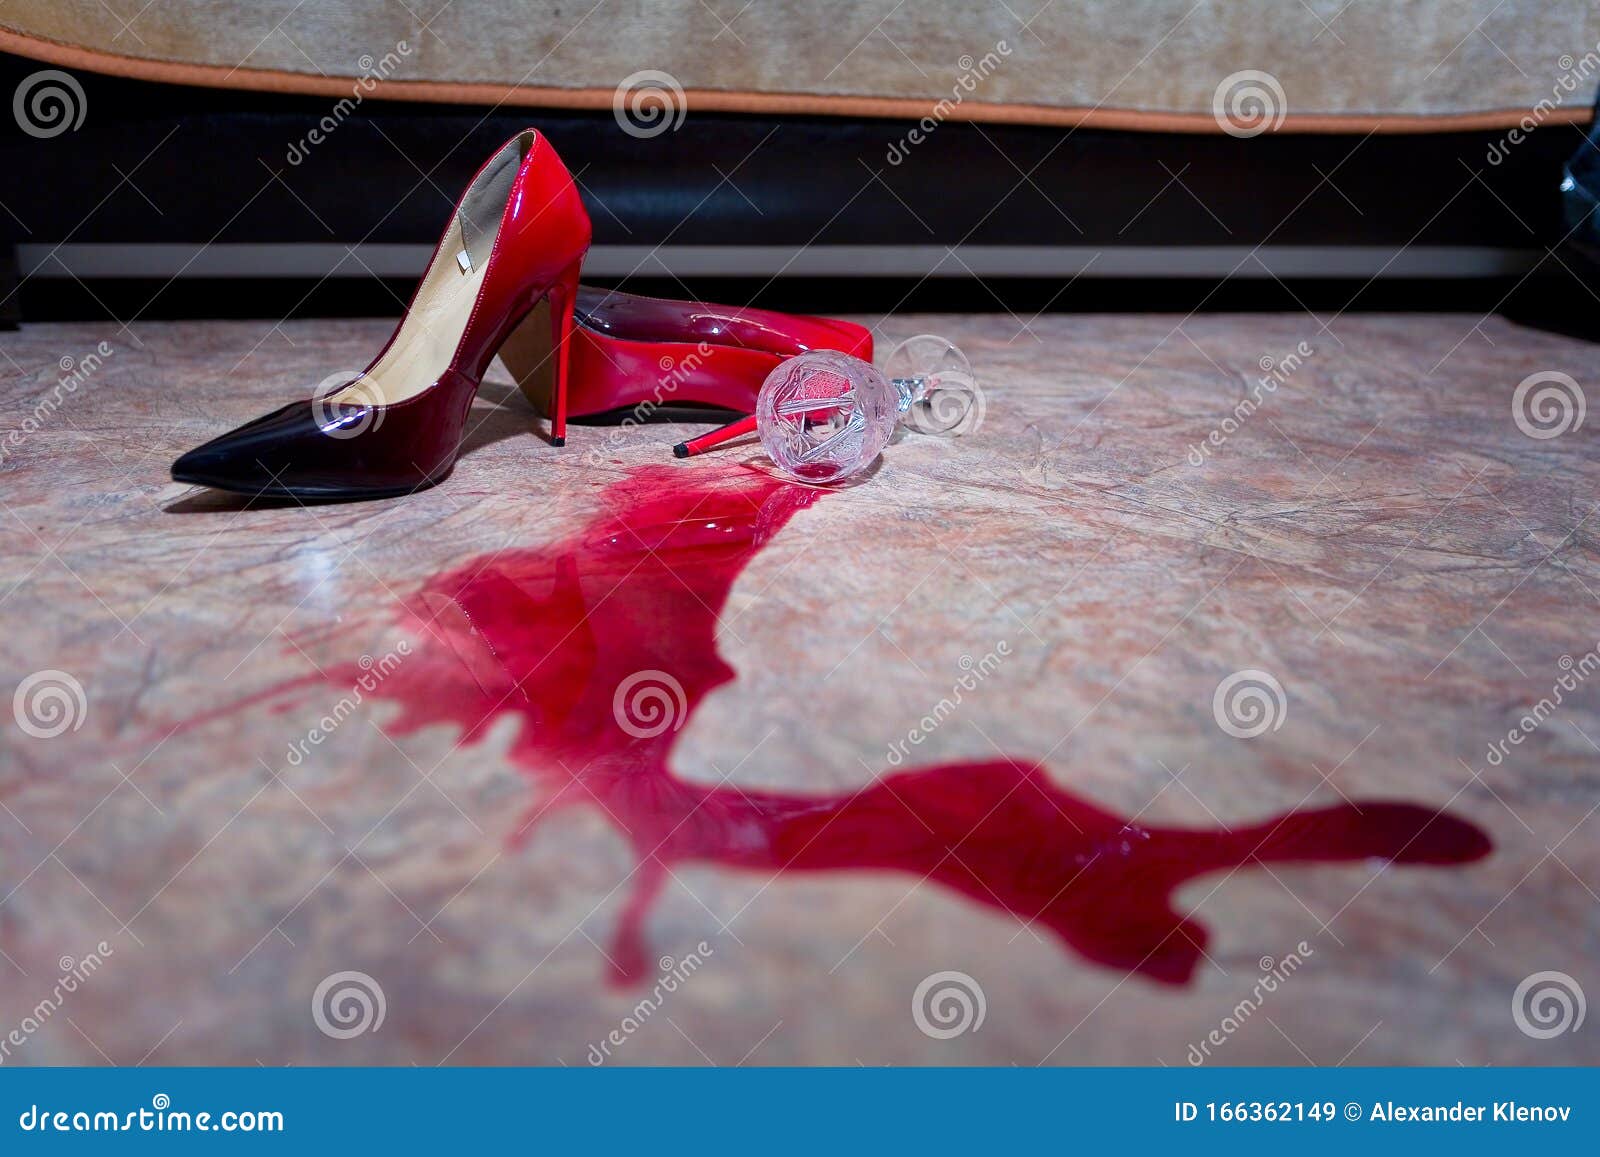 a spilled glass of wine and women`s shoes on the floor